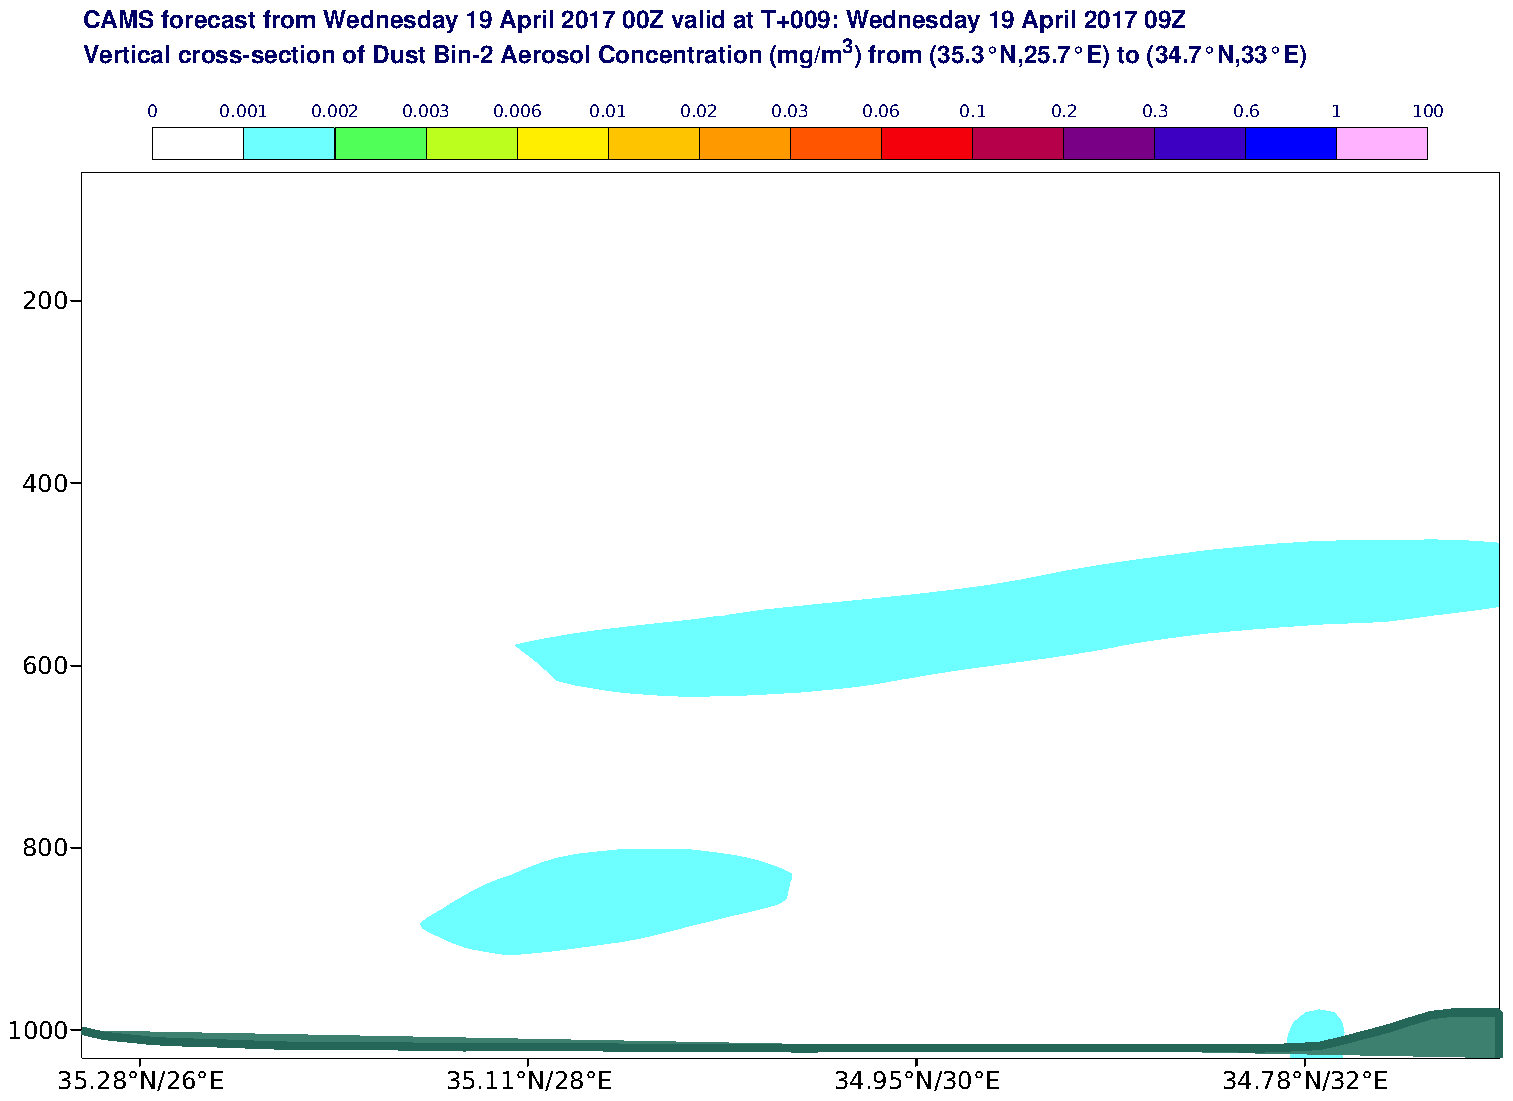 Vertical cross-section of Dust Bin-2 Aerosol Concentration (mg/m3) valid at T9 - 2017-04-19 09:00